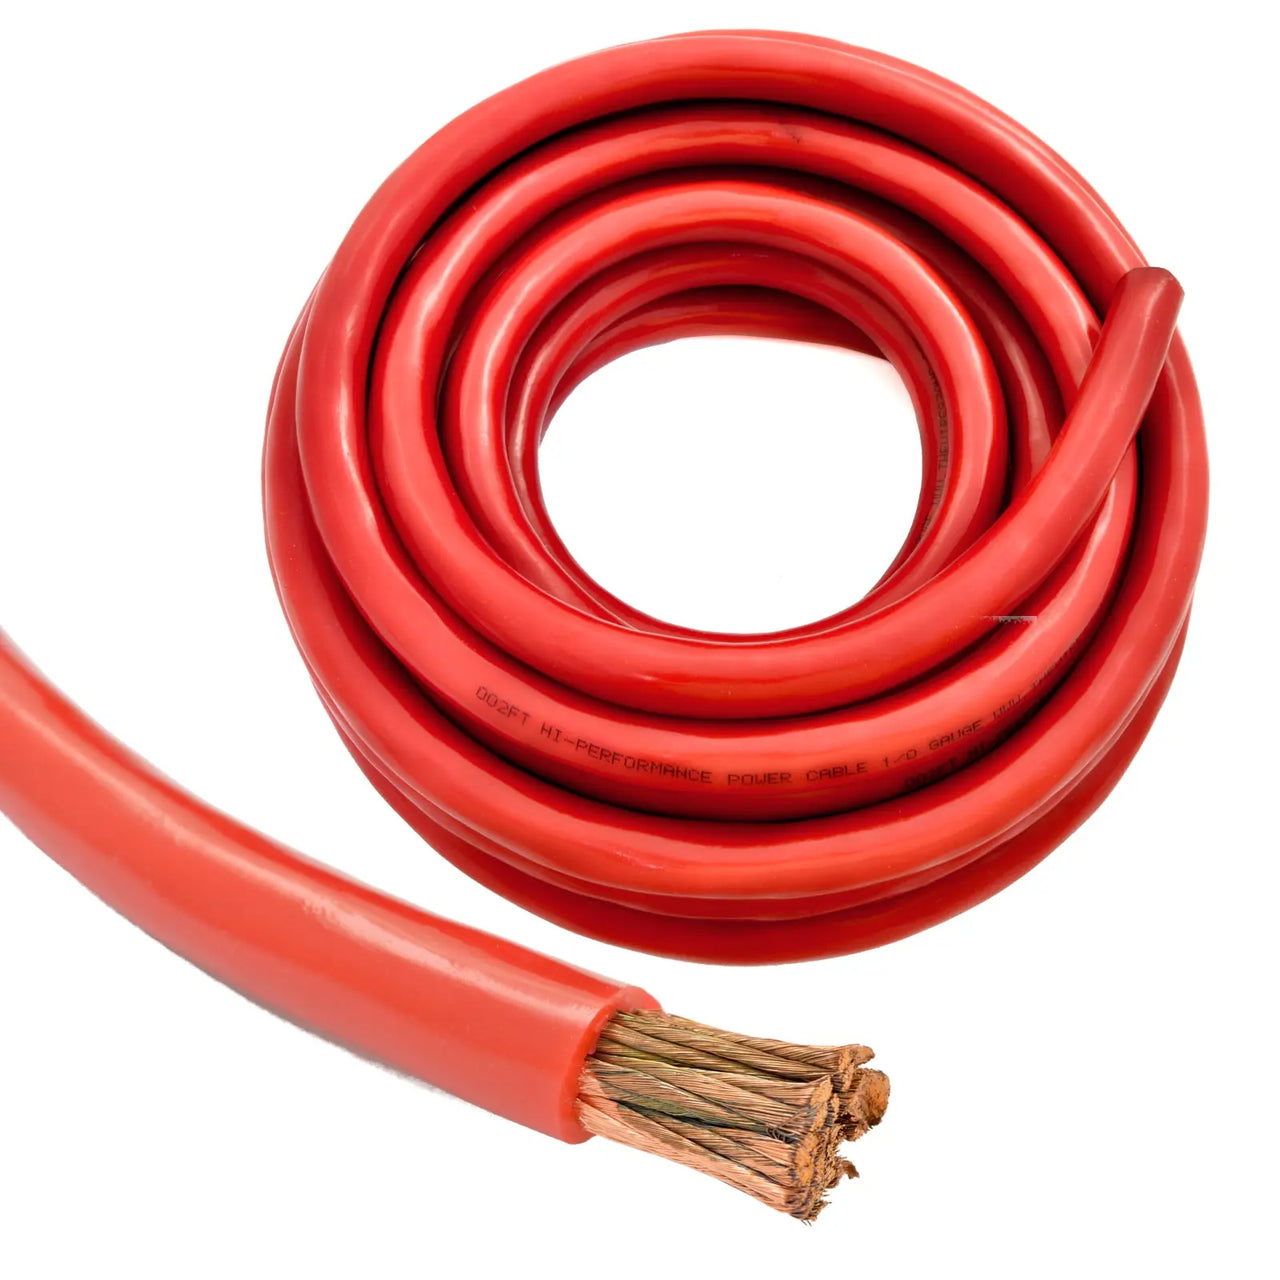 2 XP Audio SPW-0-50RD 1/0 Gauge Red Power Ground Cable 50 FT (100 Feet Total) Xtreme Twisted Battery Wire Cables